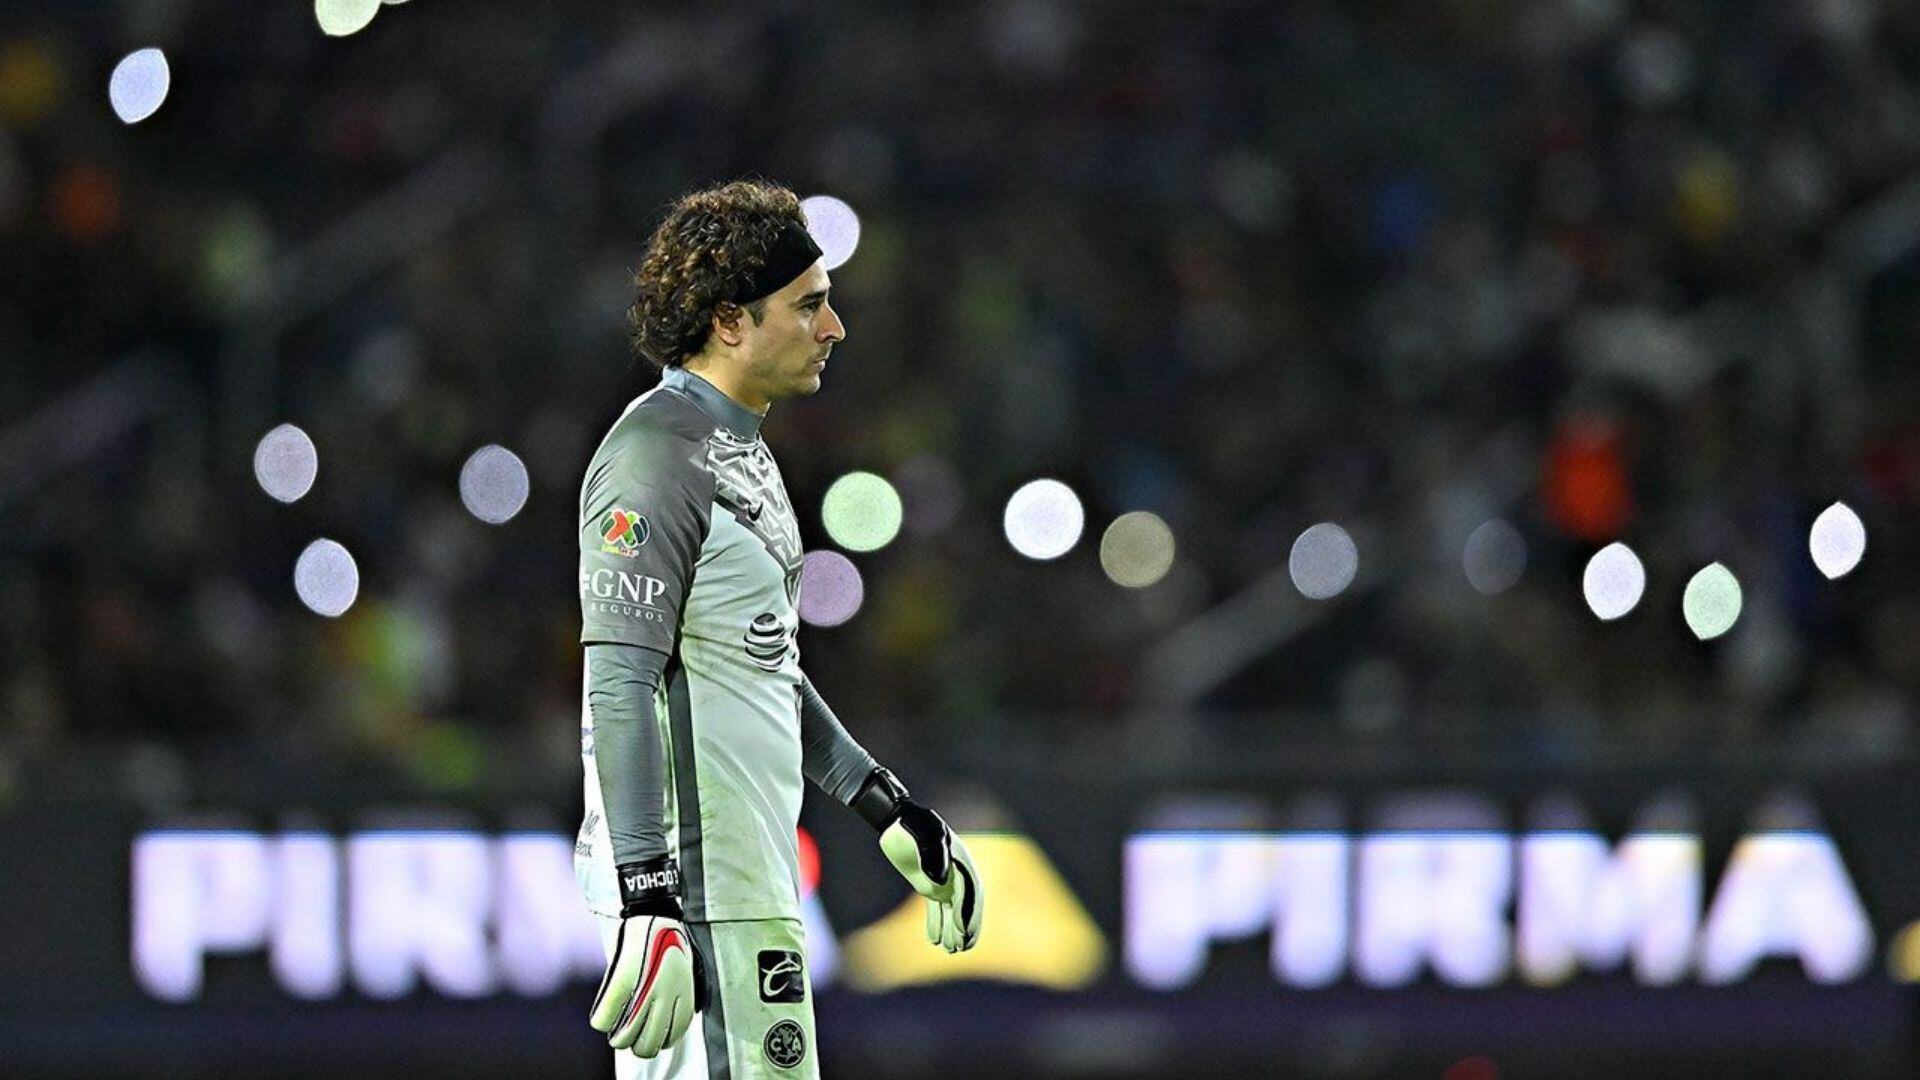 Guillermo Ochoa took a decision regarding his future with Club América now that they asked for Camilo Vargas